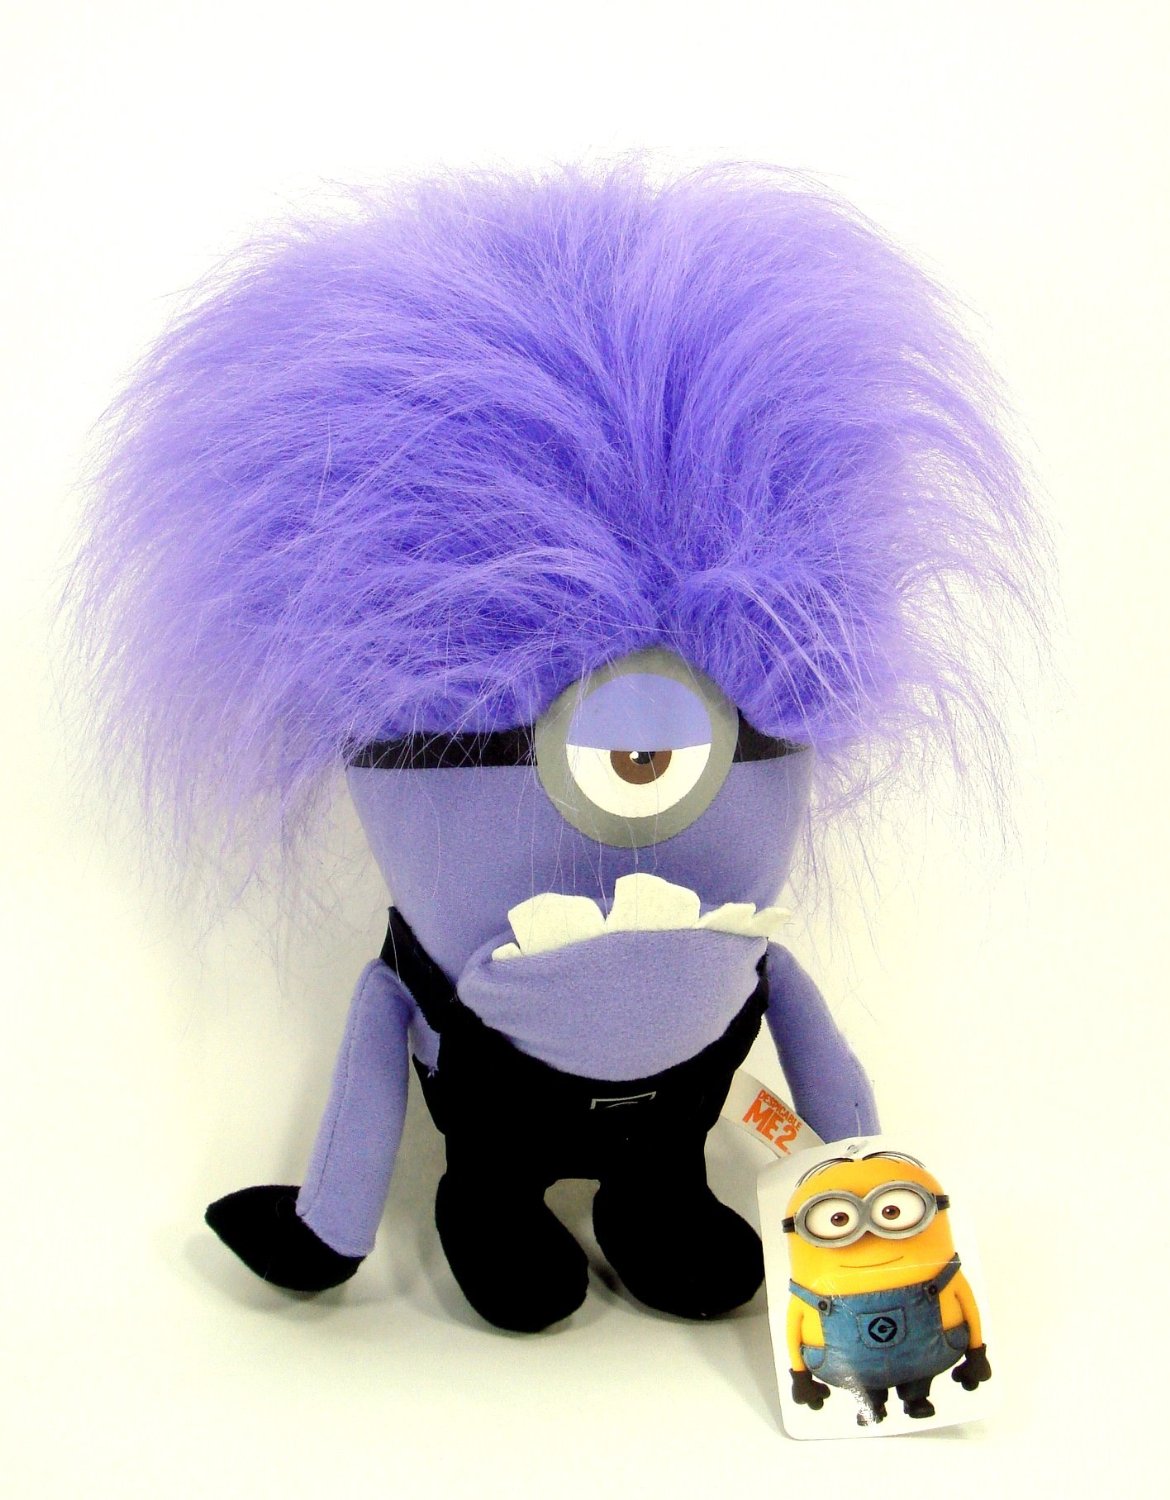 Evil Minion Stuffed Animal from Despicable Me 2